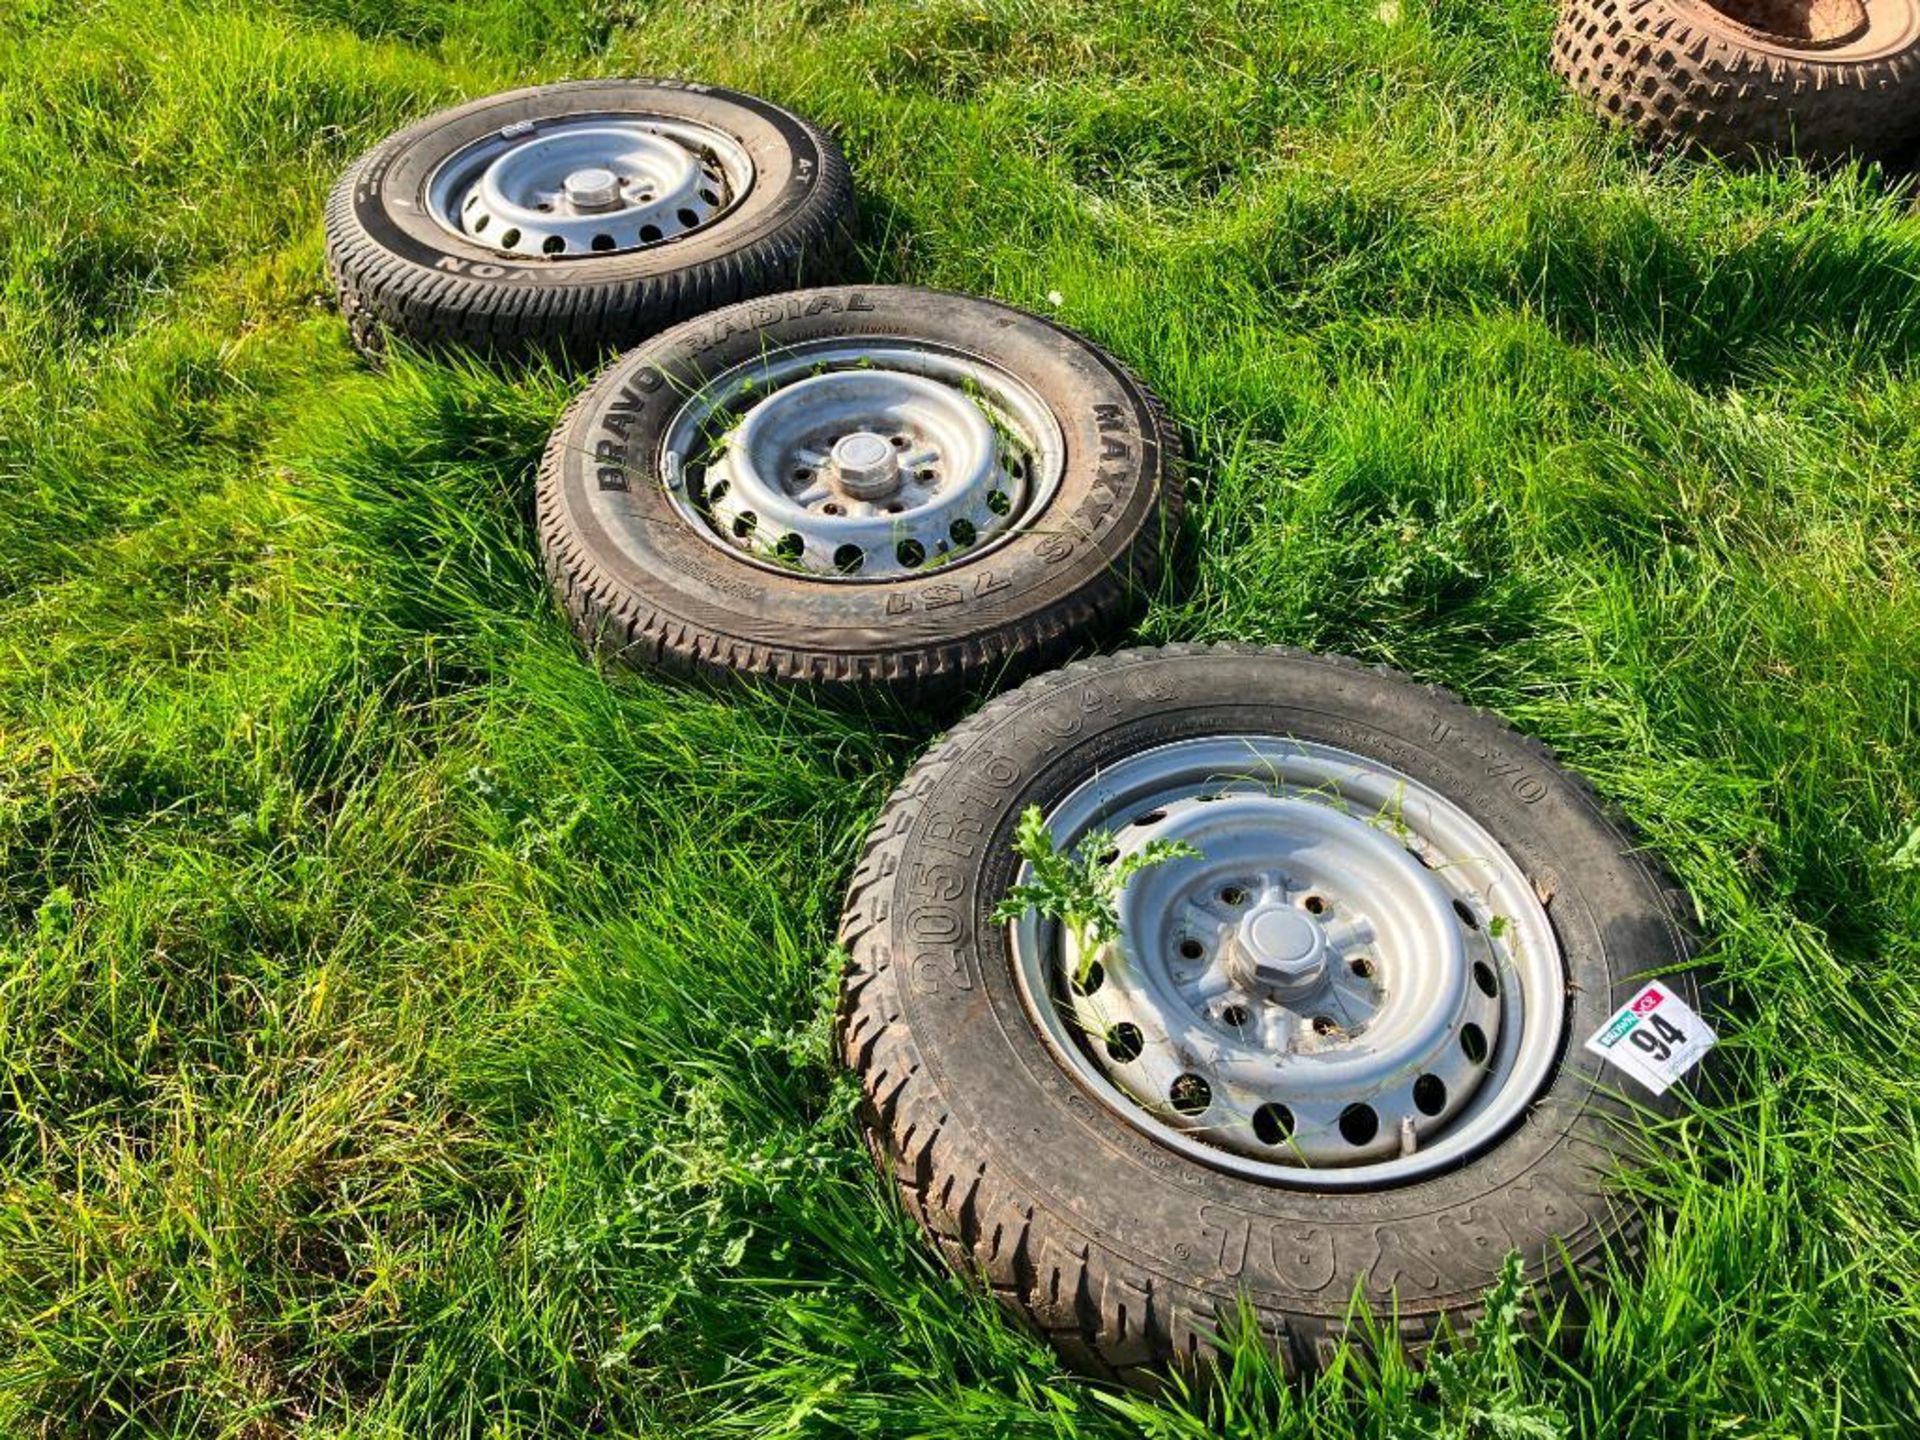 3No 205/80R16 6 stud steel wheels and tyres